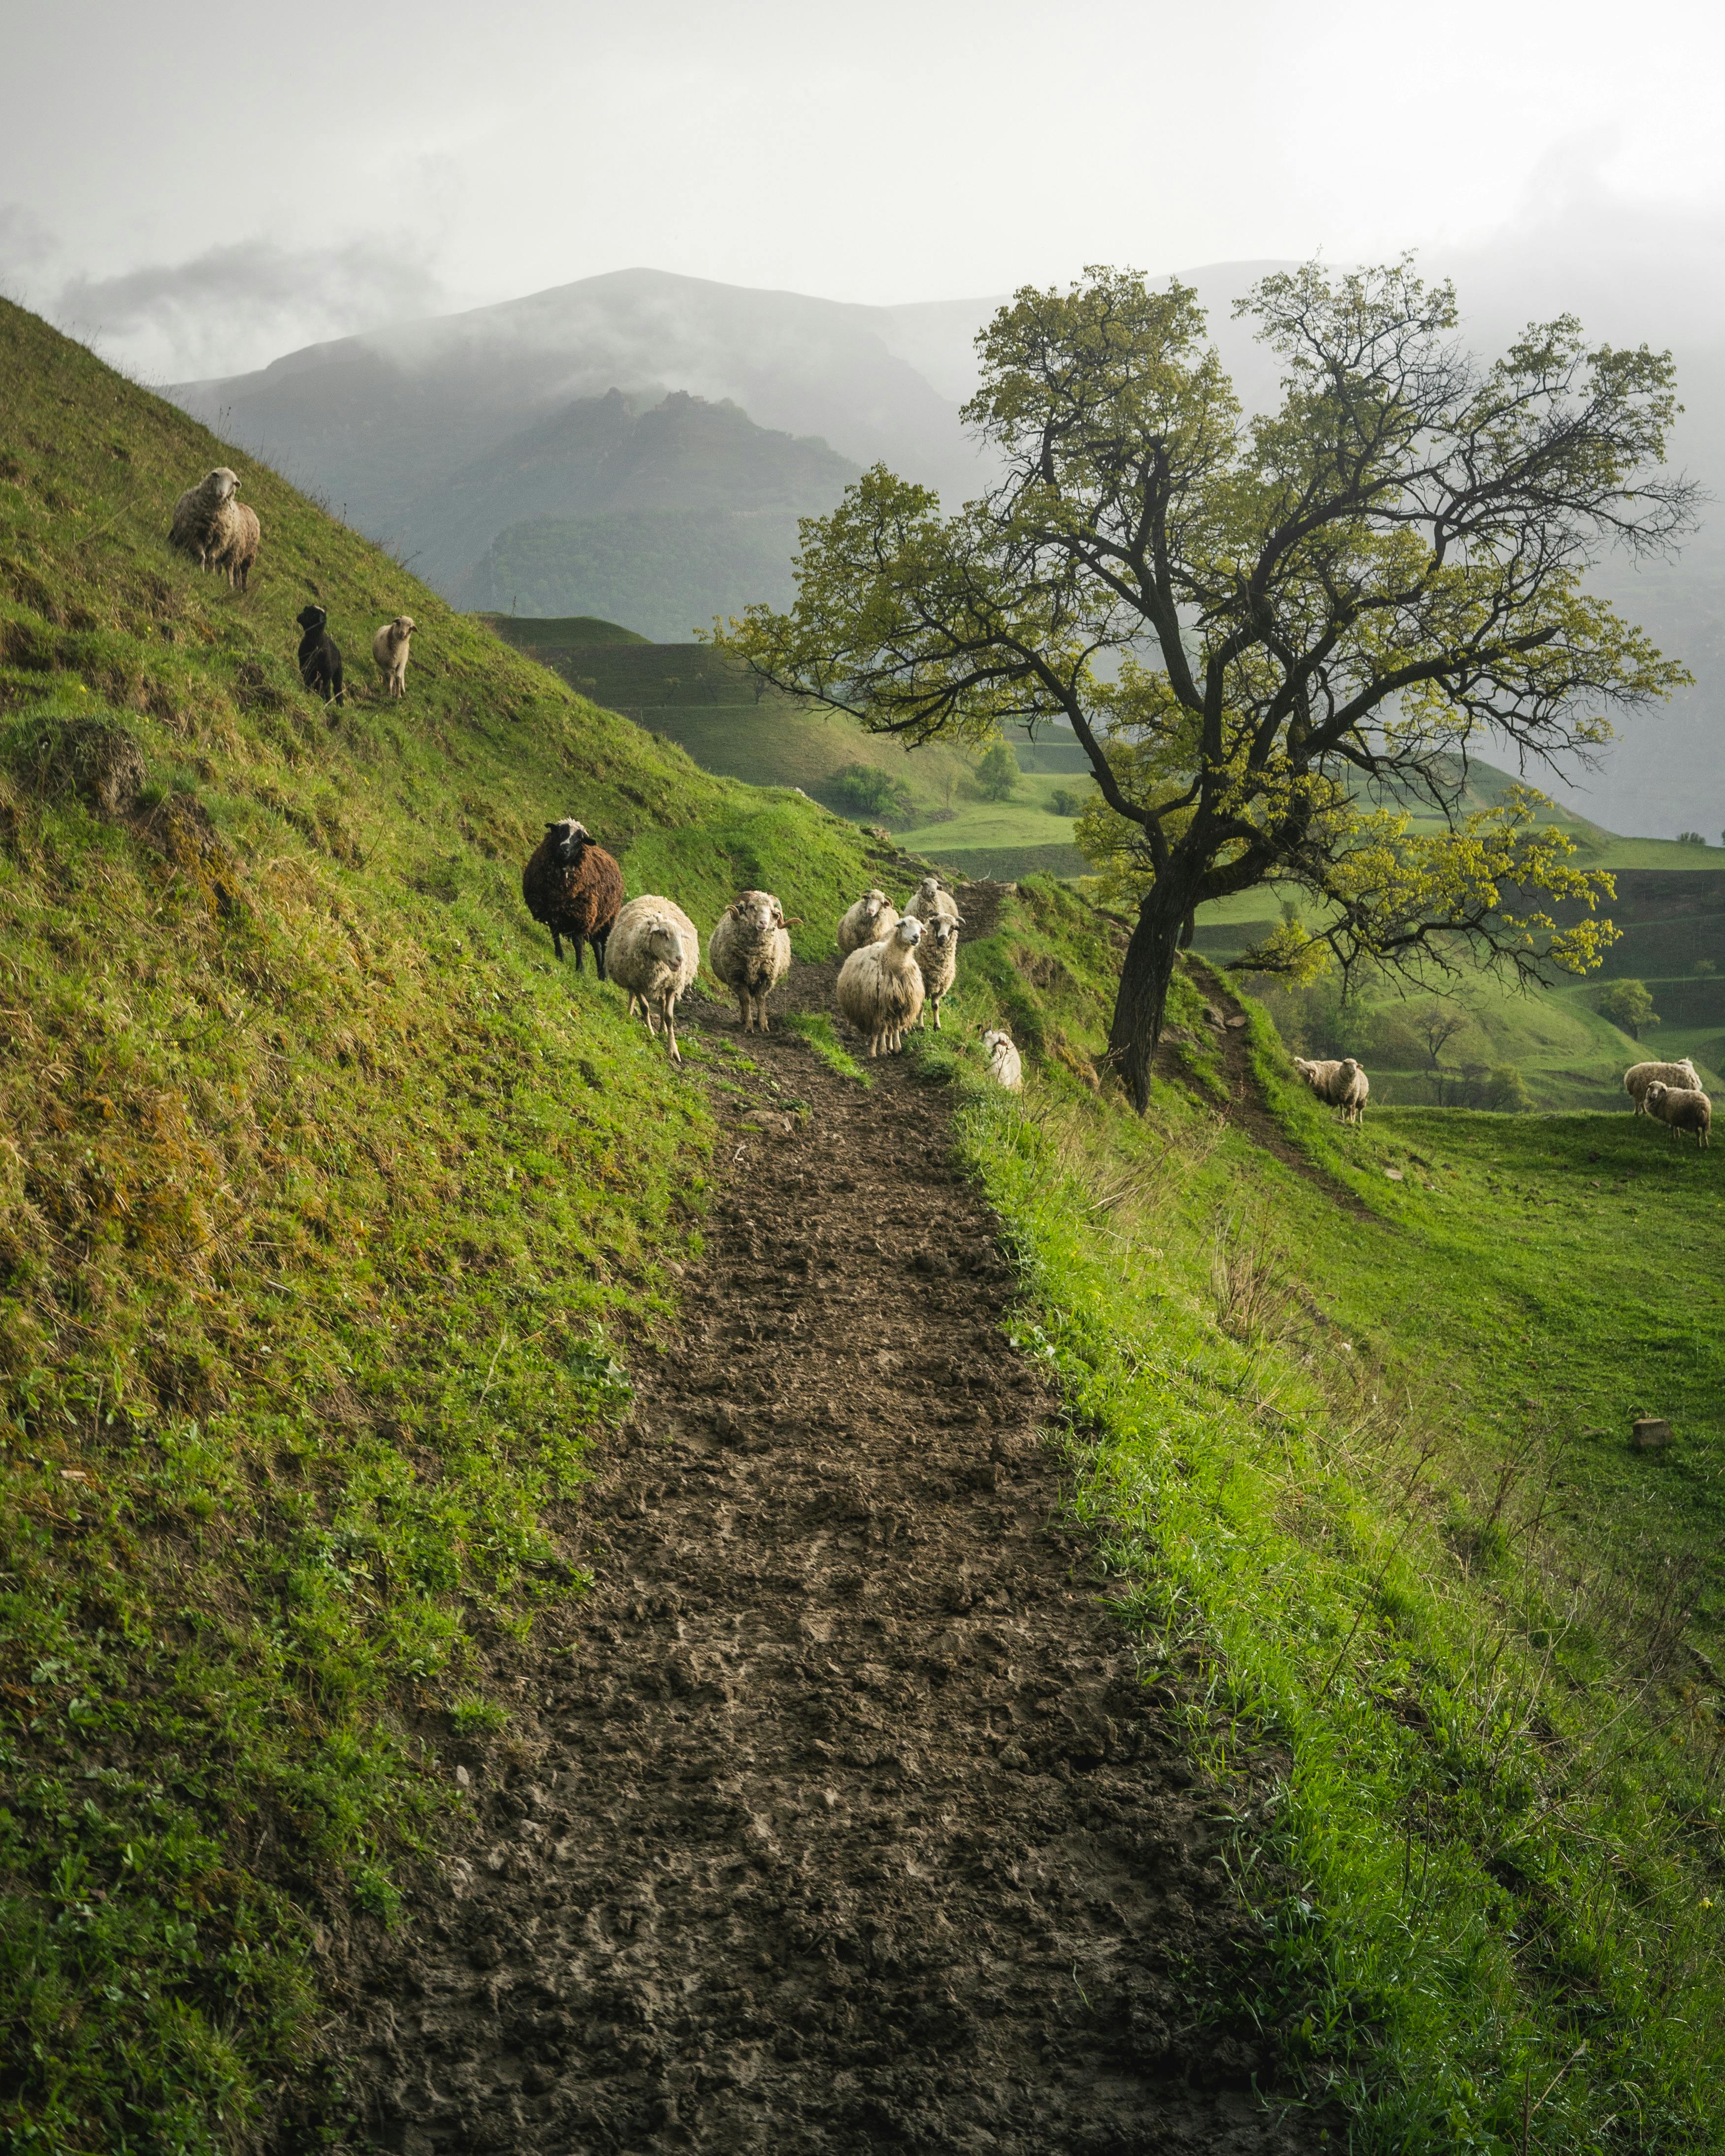 herd of sheep on mountain slope with green grass